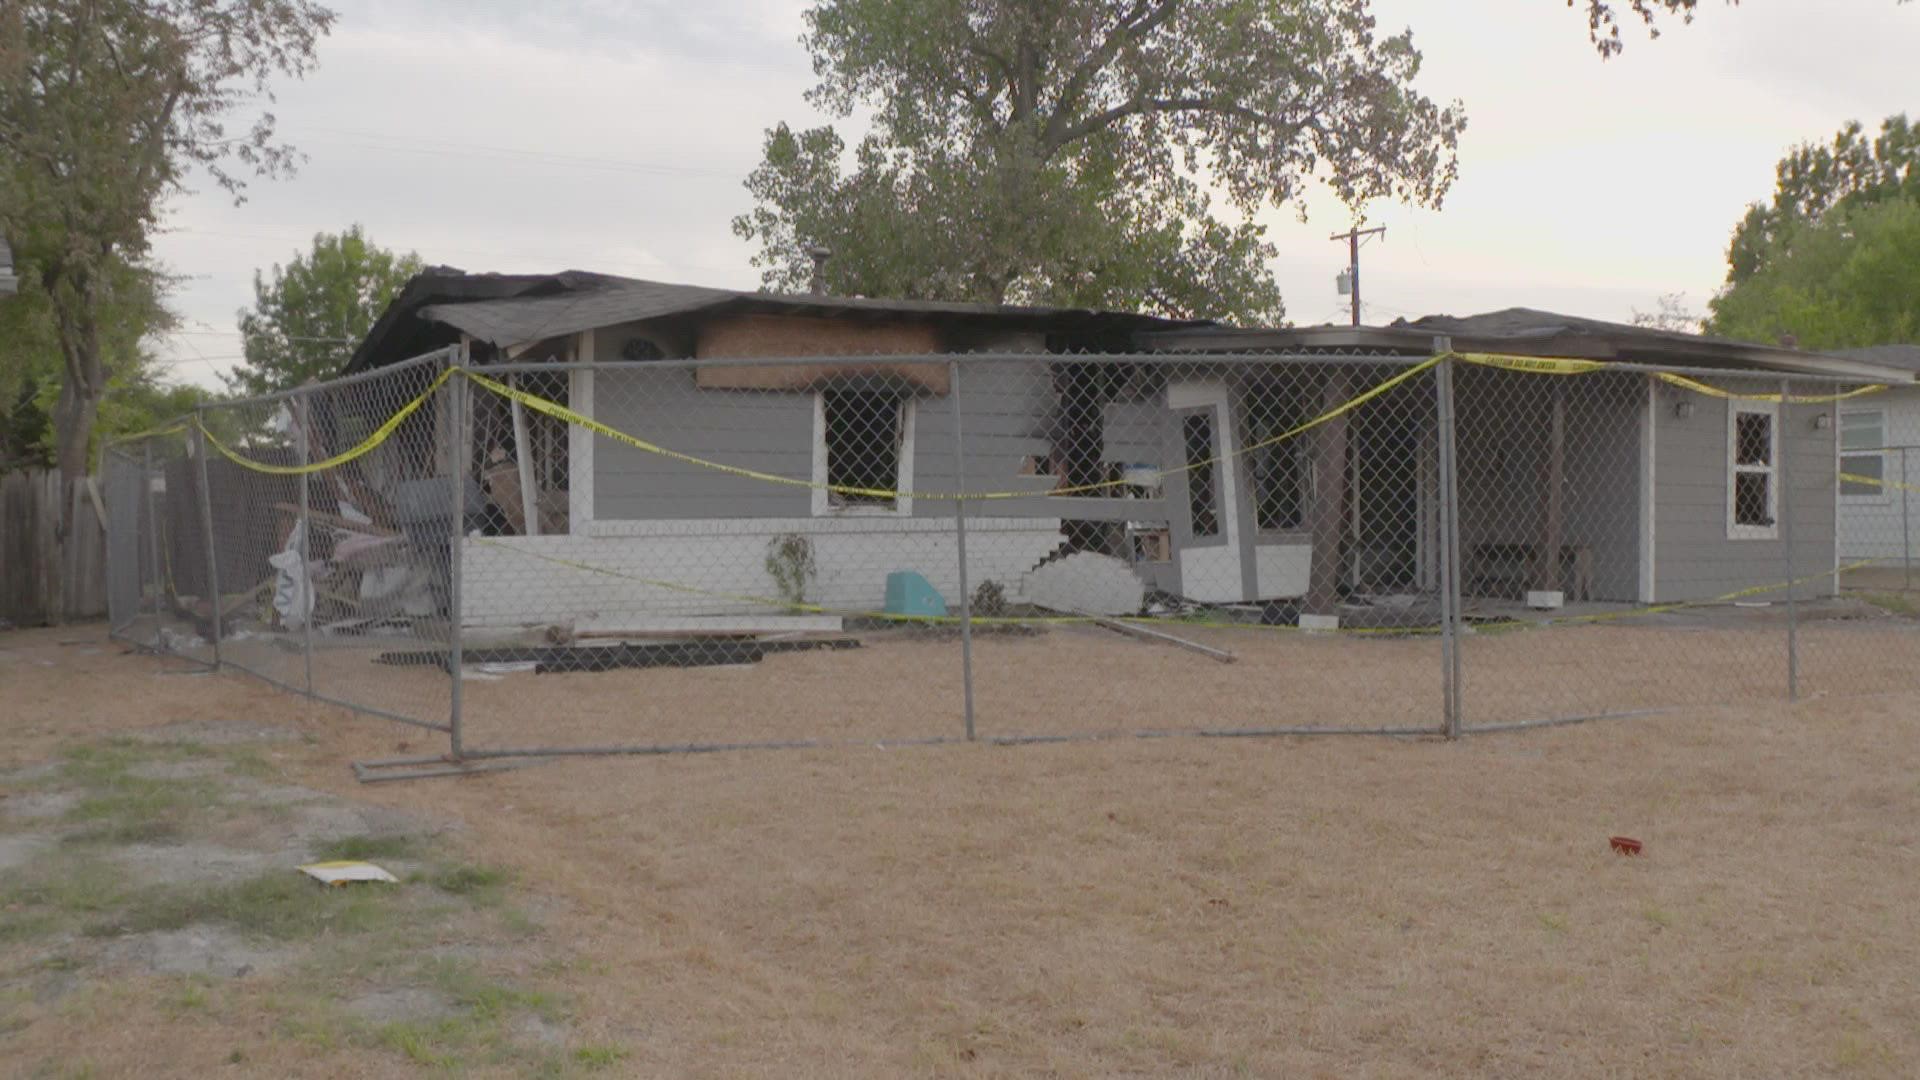 Six family members, with ages ranging from 3 to 54, were inside the home at the time.